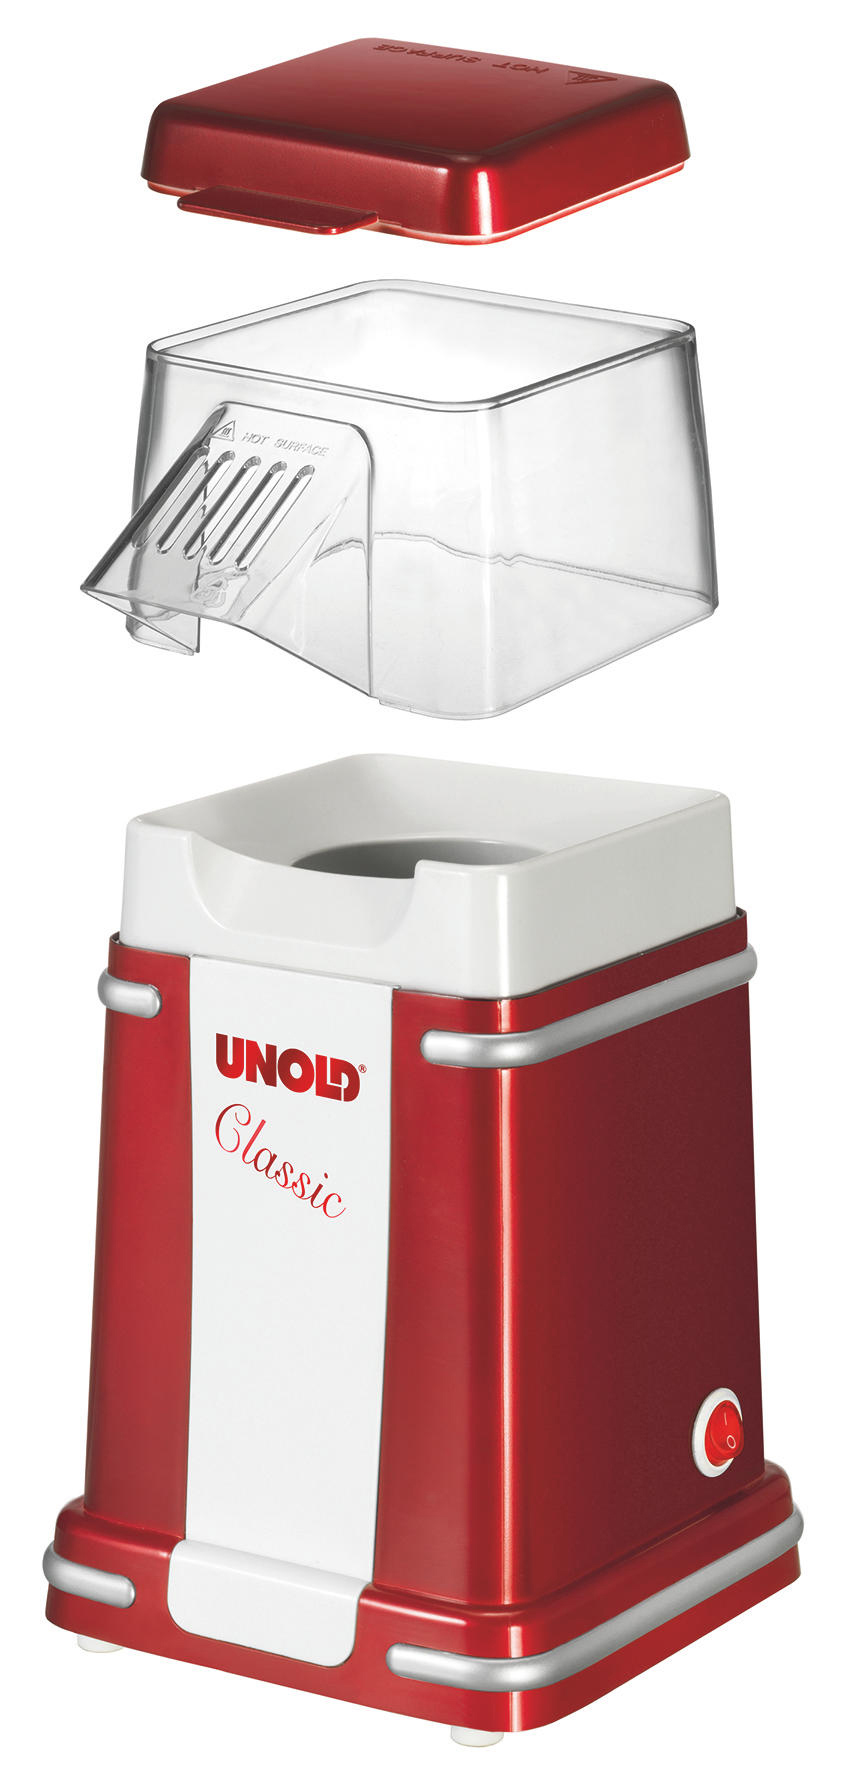 Popcornmaker Classic UNOLD 48525 Rot